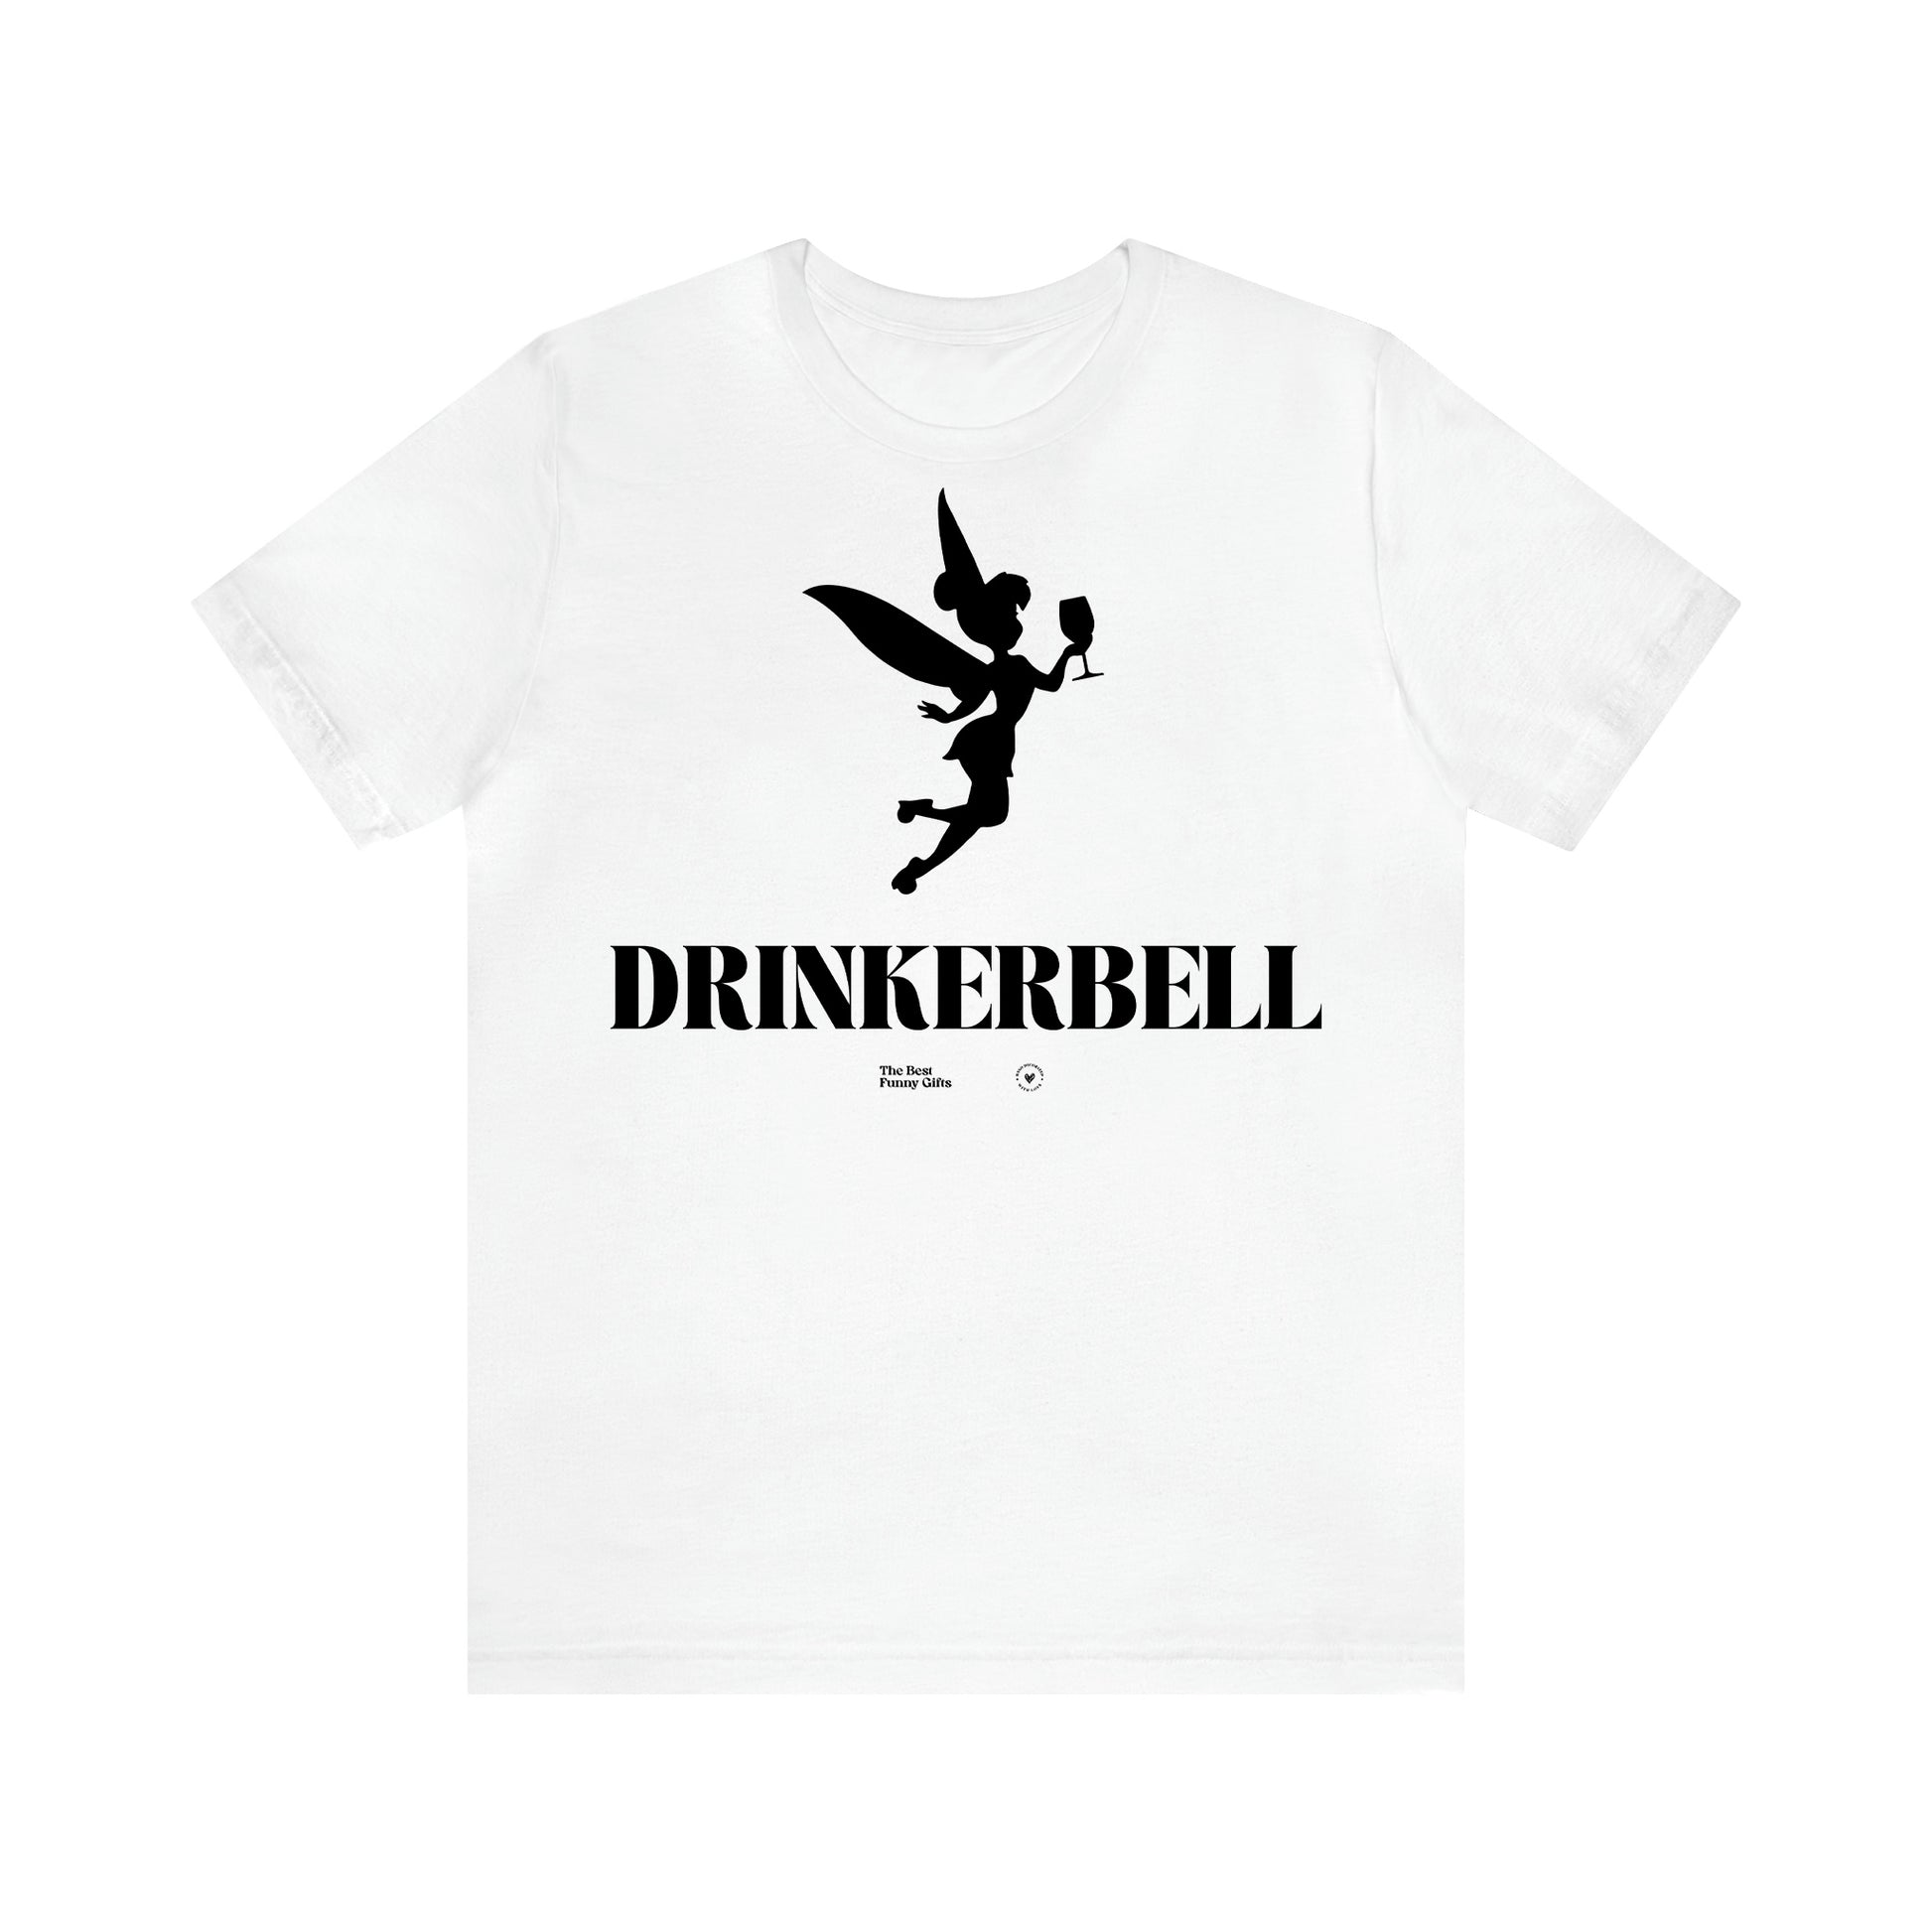 Women's T Shirts Drinkerbell - The Best Funny Gifts